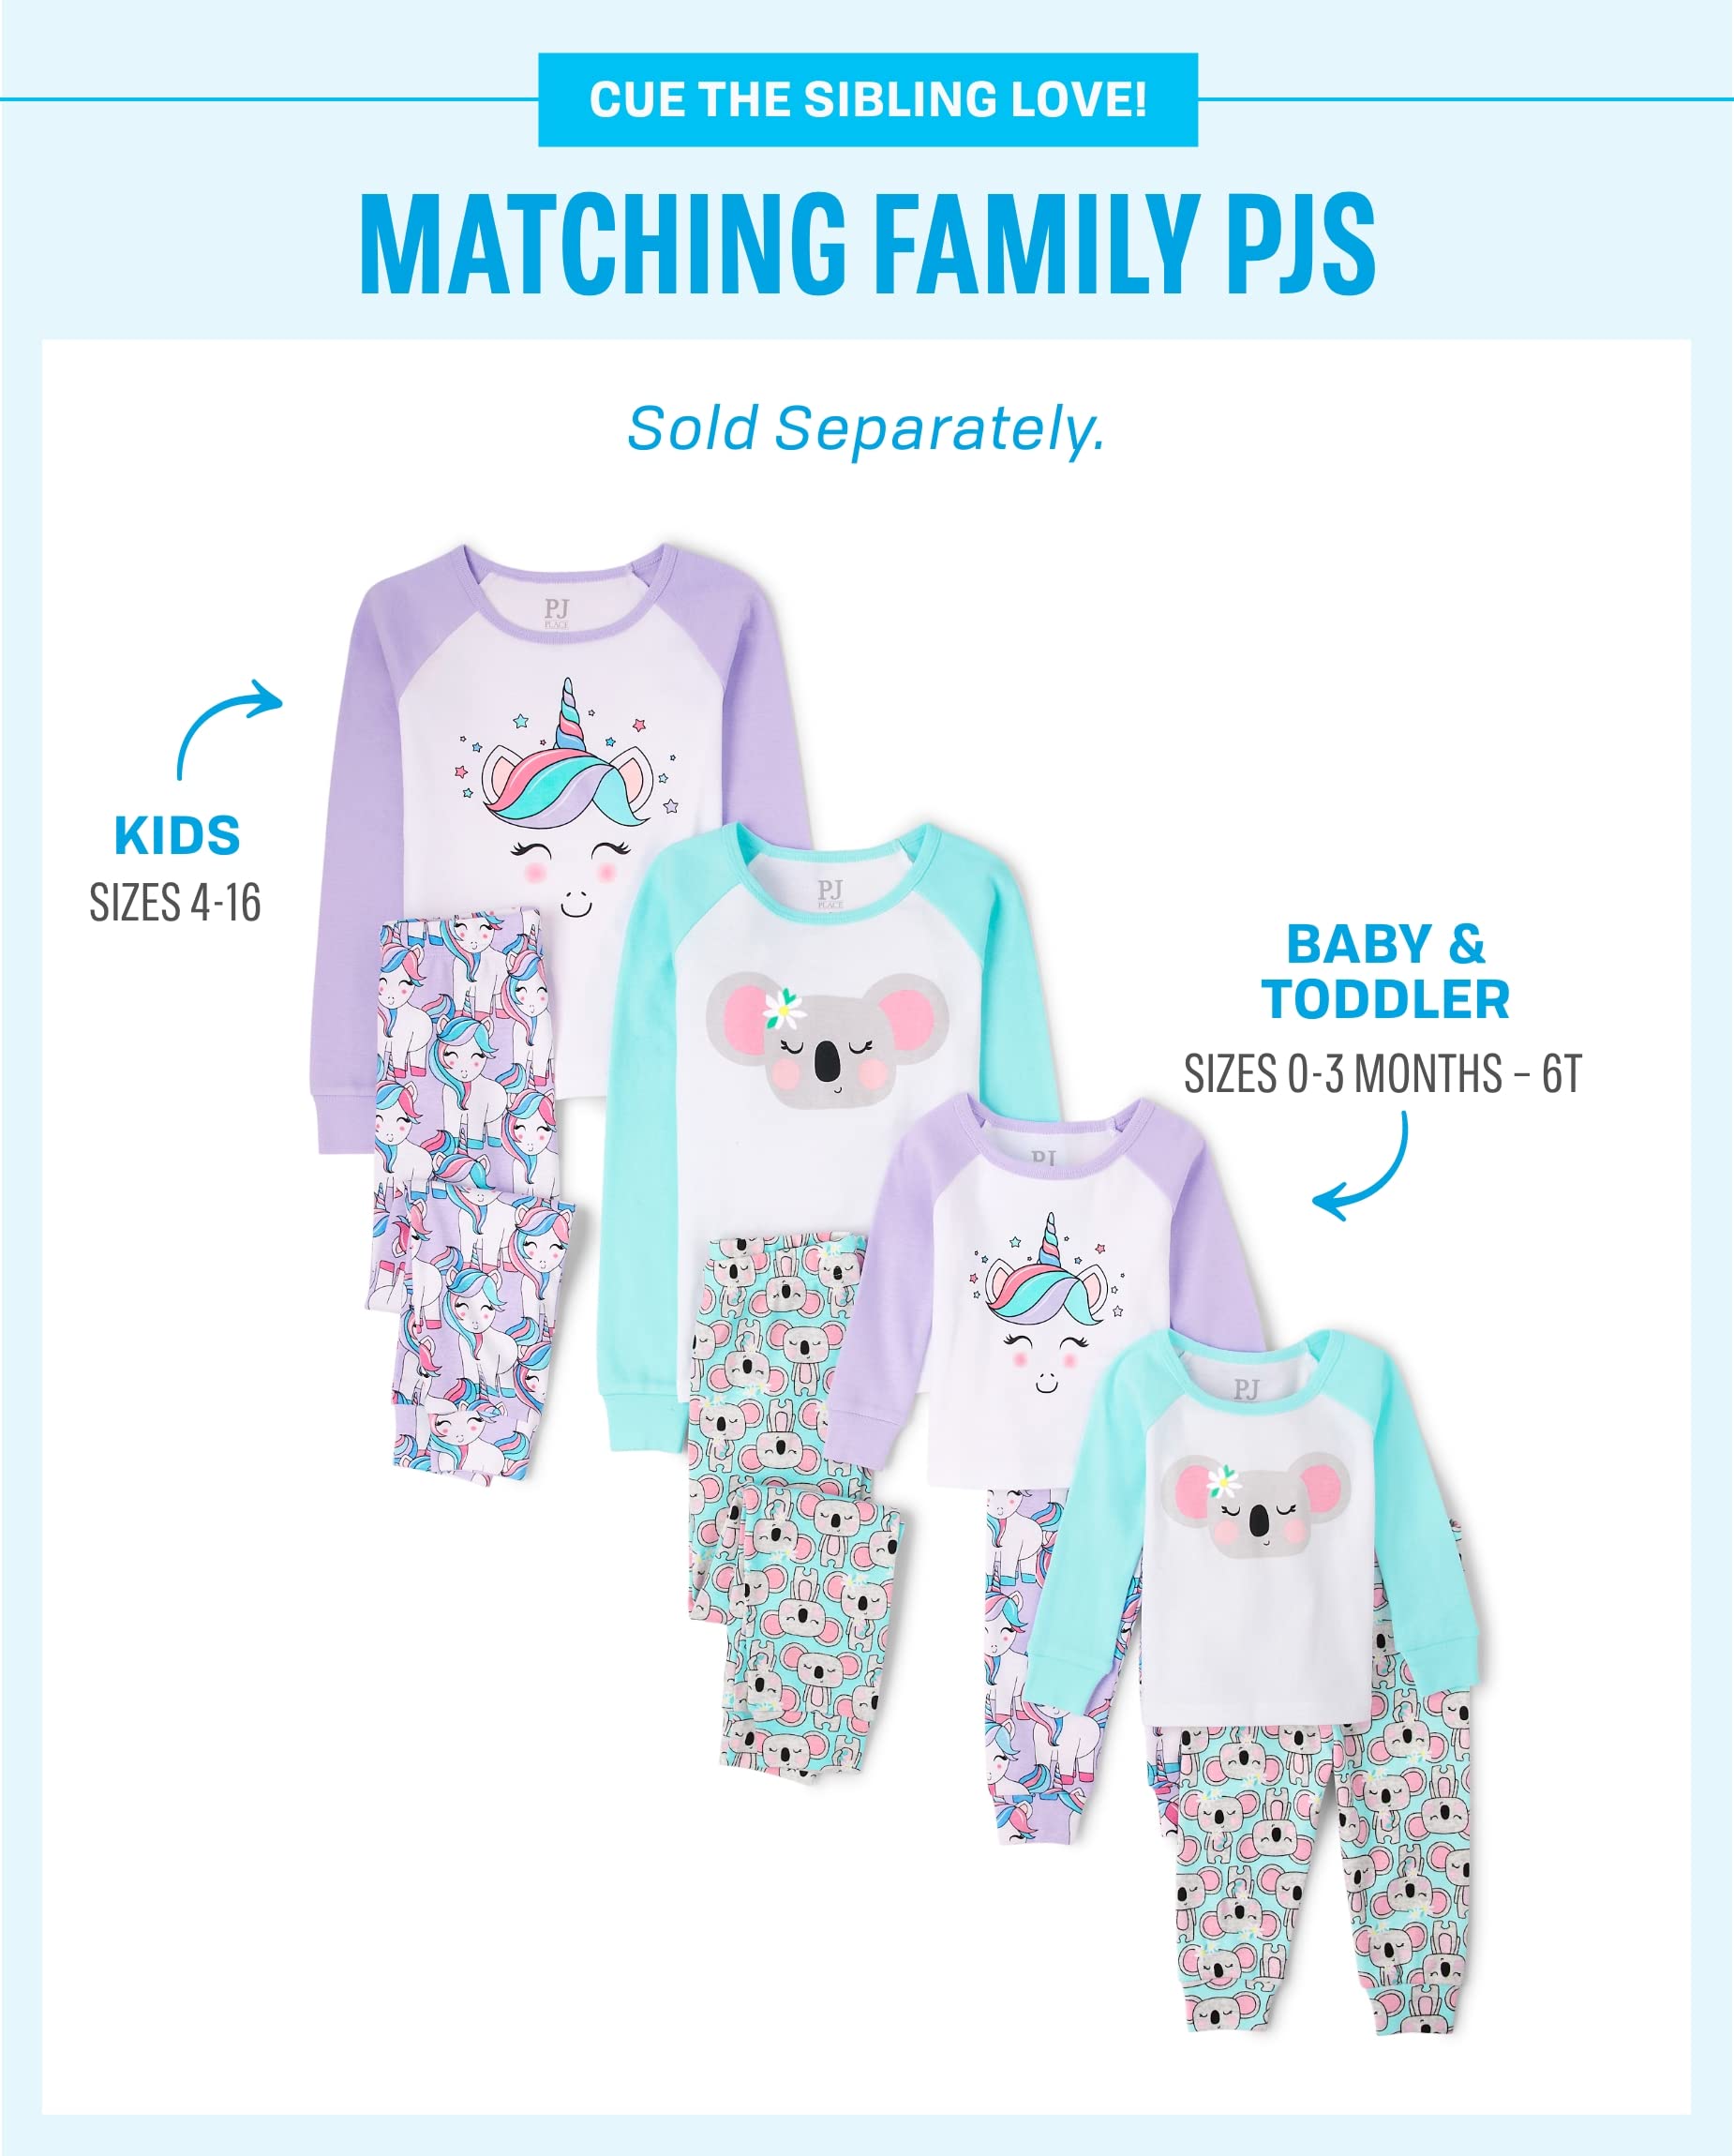 The Children's Place Girls' Kids-PJ Long Sleeve Top and Pants Pajama Set